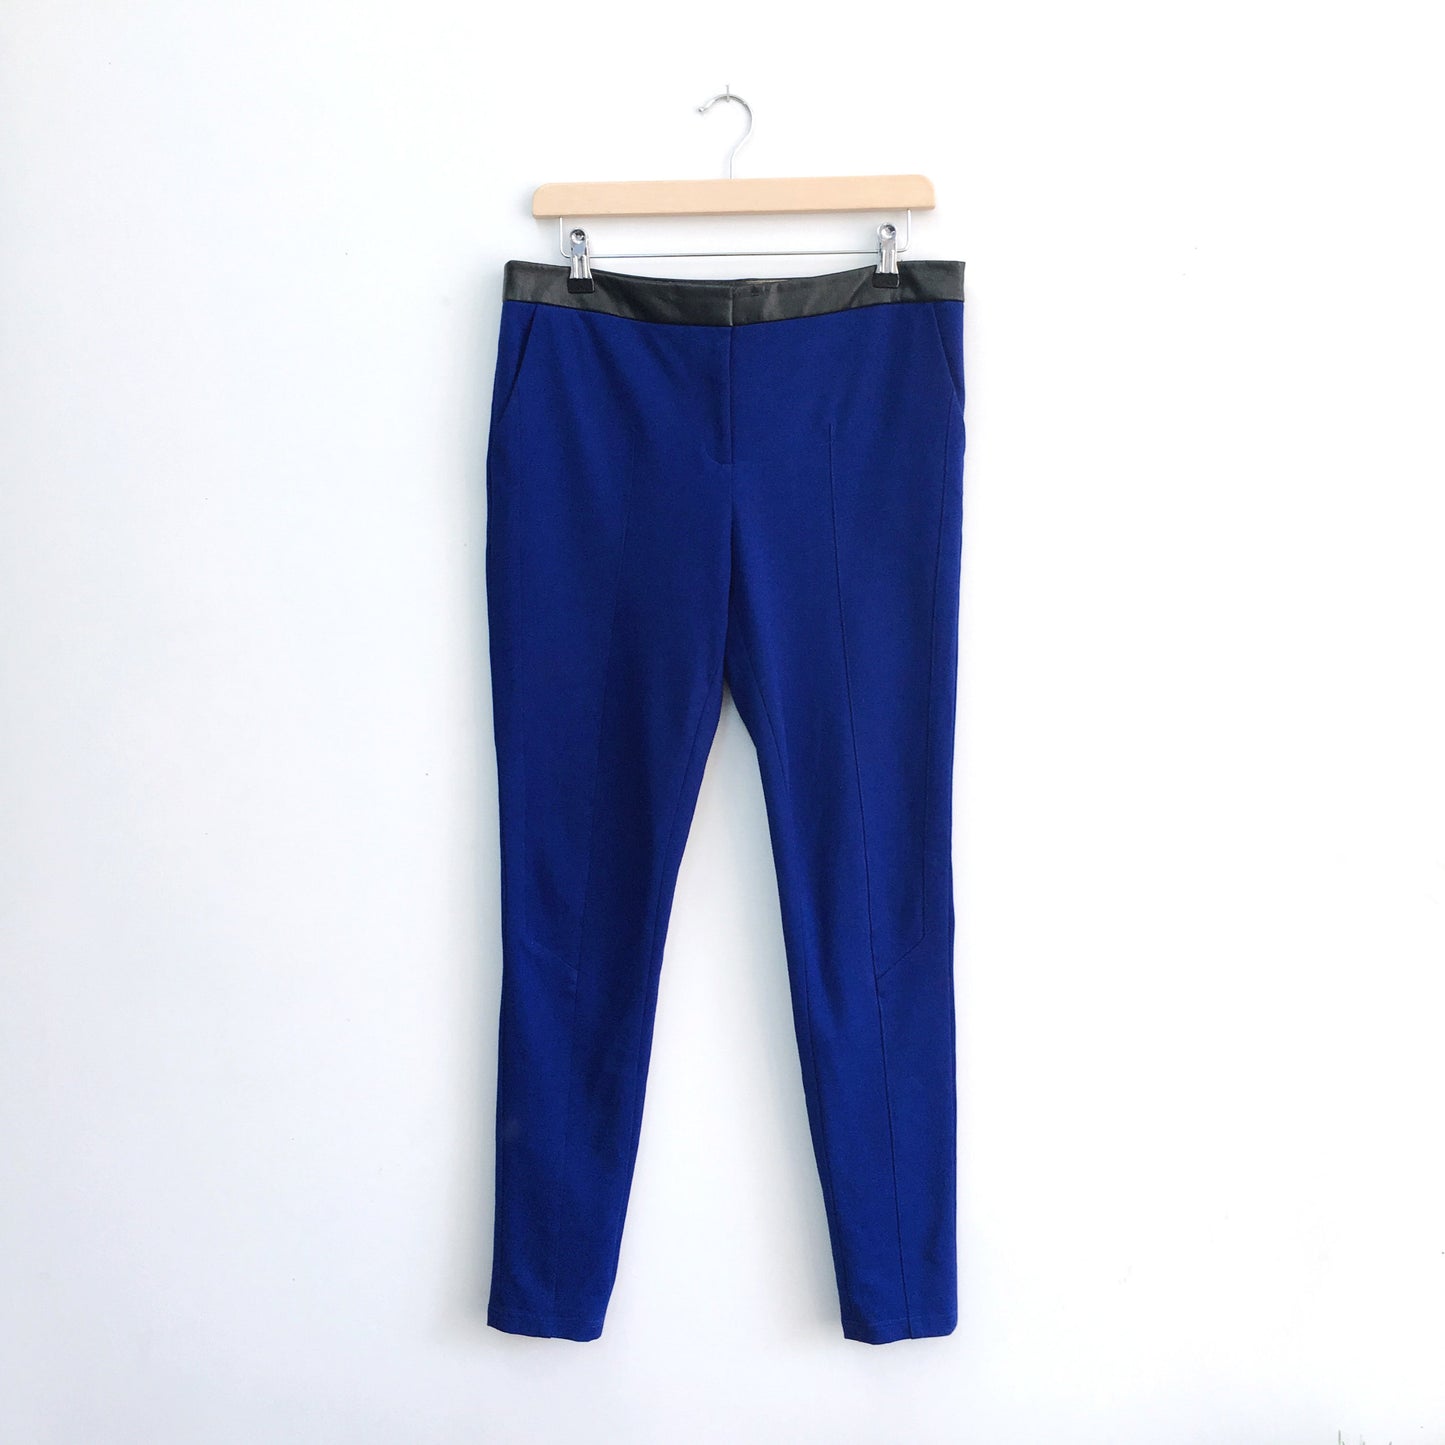 Ted Baker Electric Blue Trousers - size 3